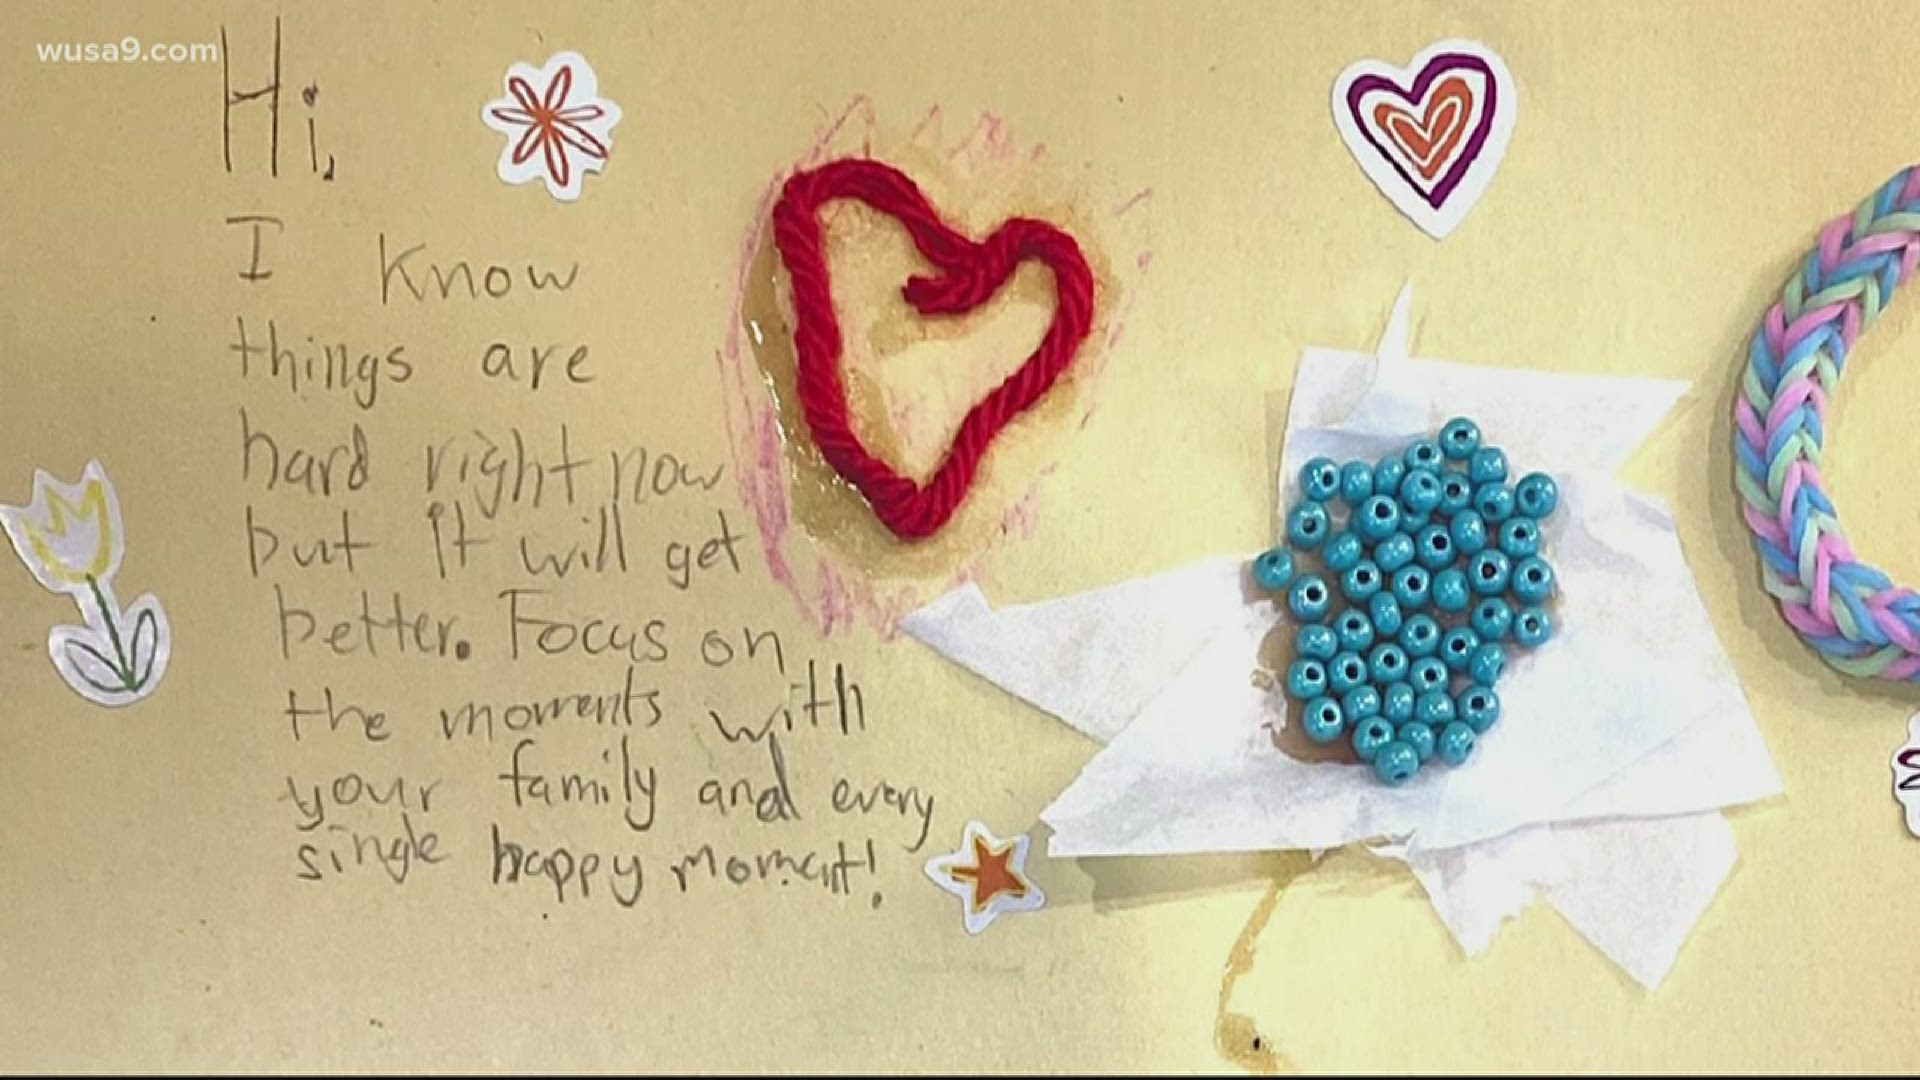 The nonprofit Mobile Hope is connecting kids through old-fashioned letter writing.